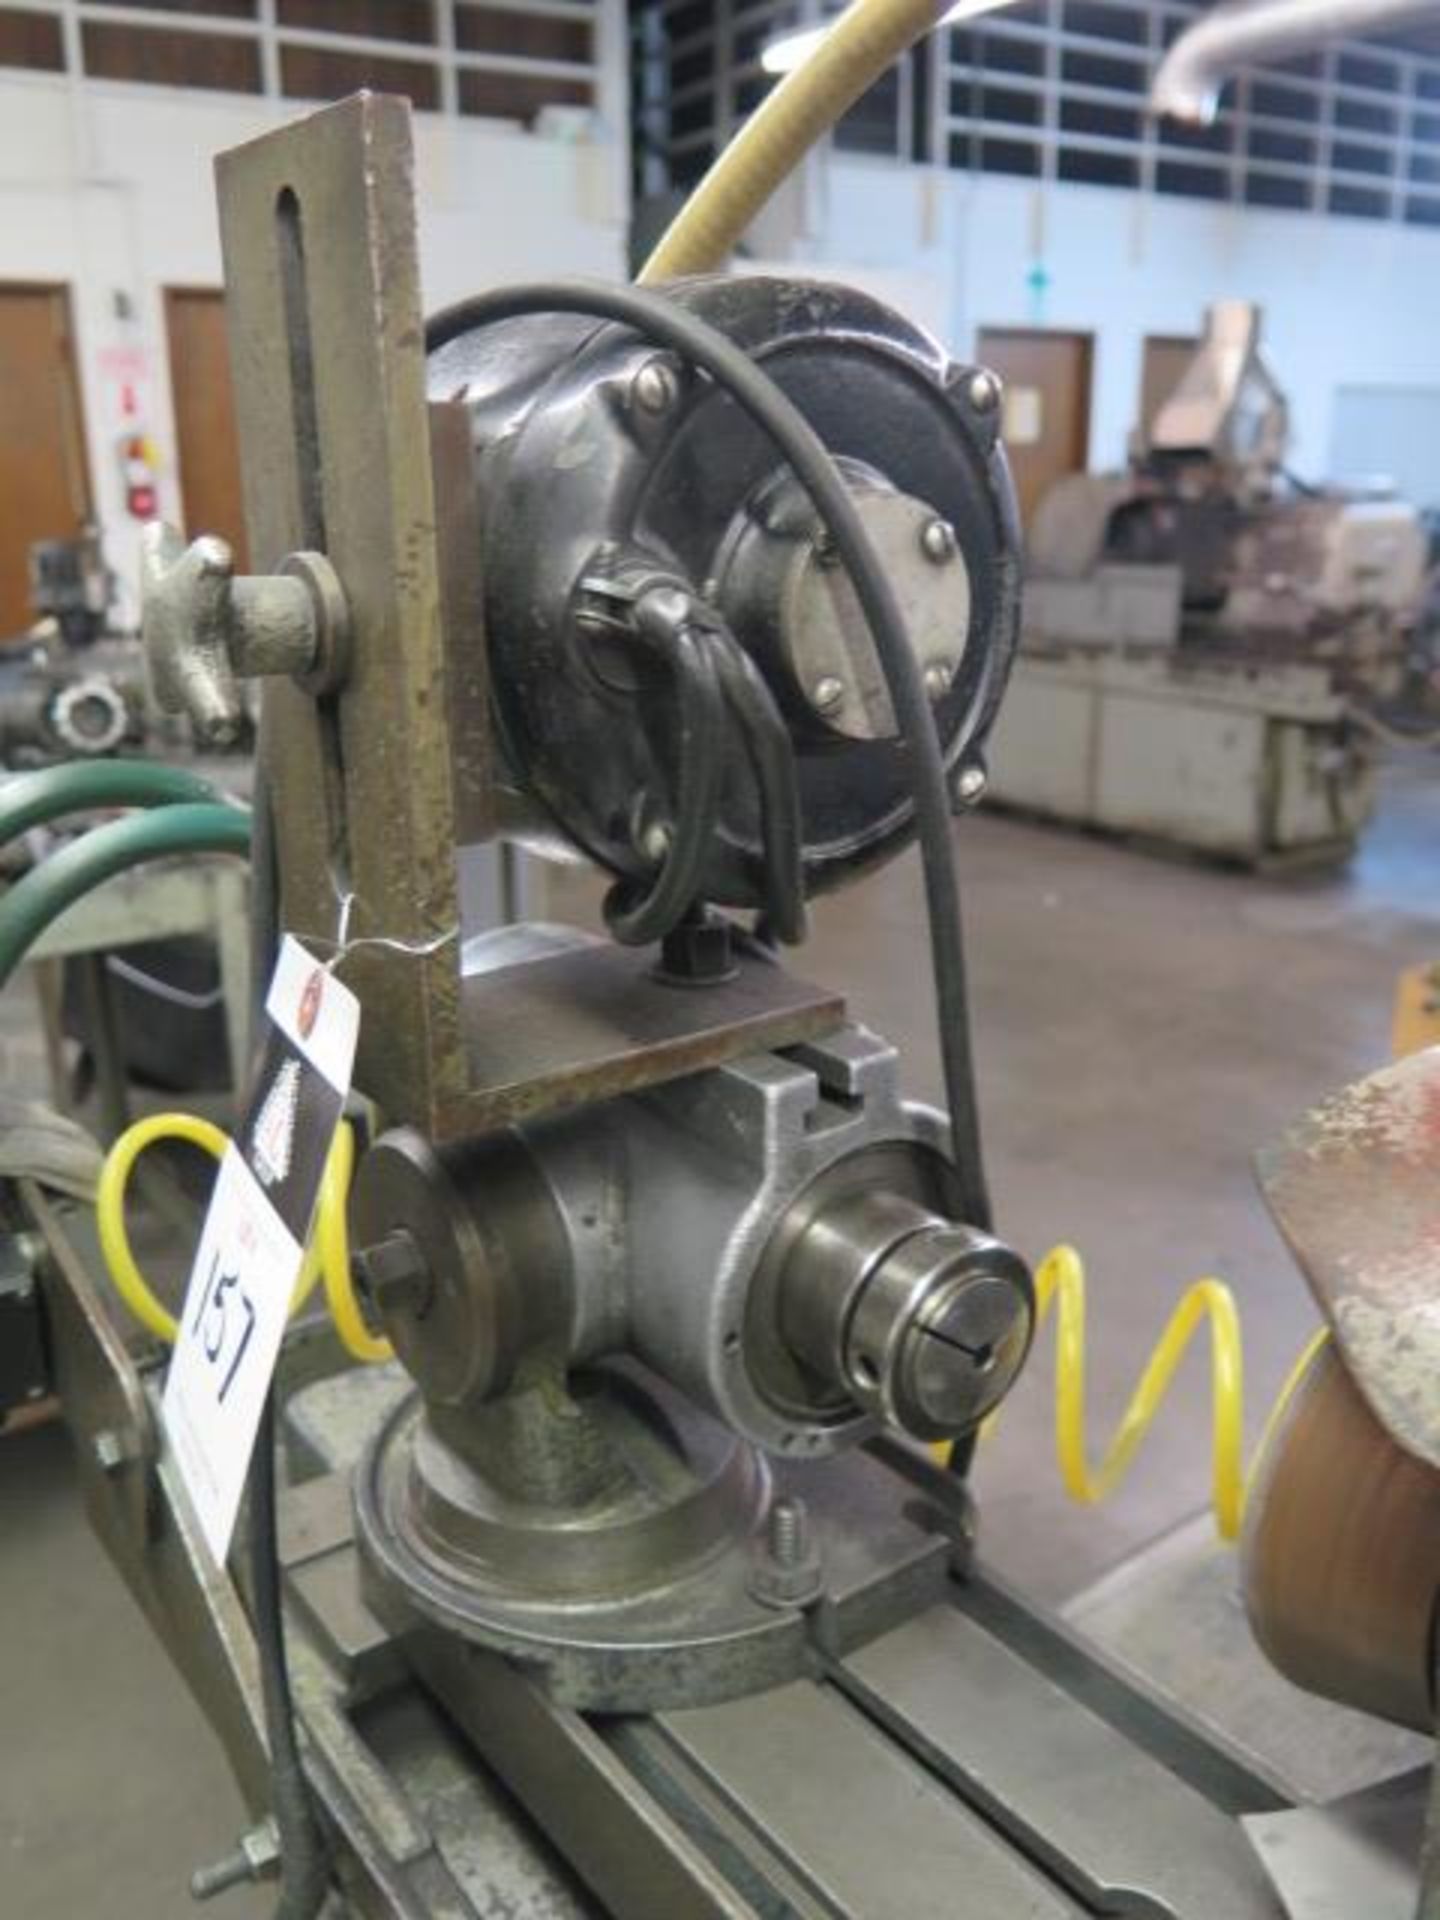 K.O. Lee BA960BB Tool and Cutter Grinder s/n 7880-10-2 w/ Motorized Work Head with SOLD AS IS - Image 6 of 10